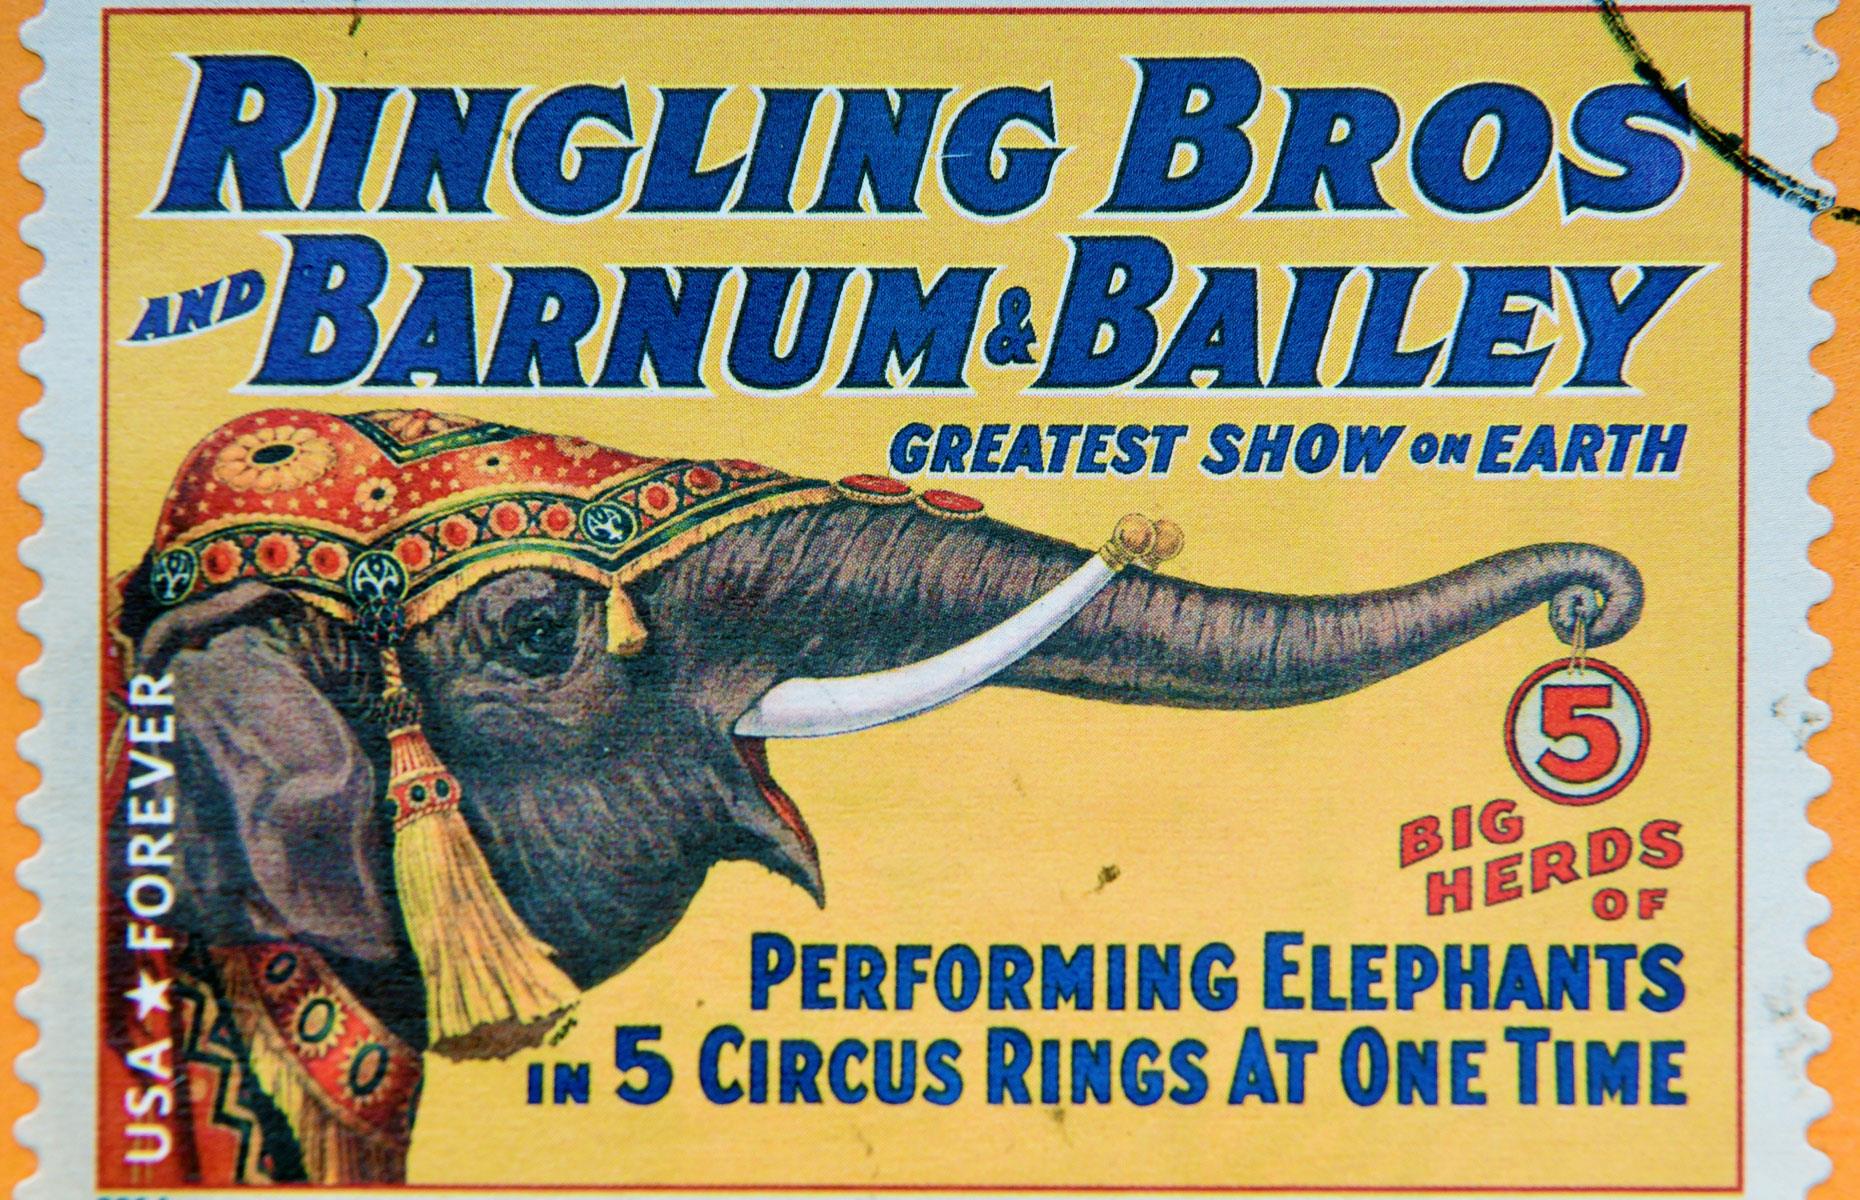 Ringling Bros. and Barnum & Bailey's elephant phase-out